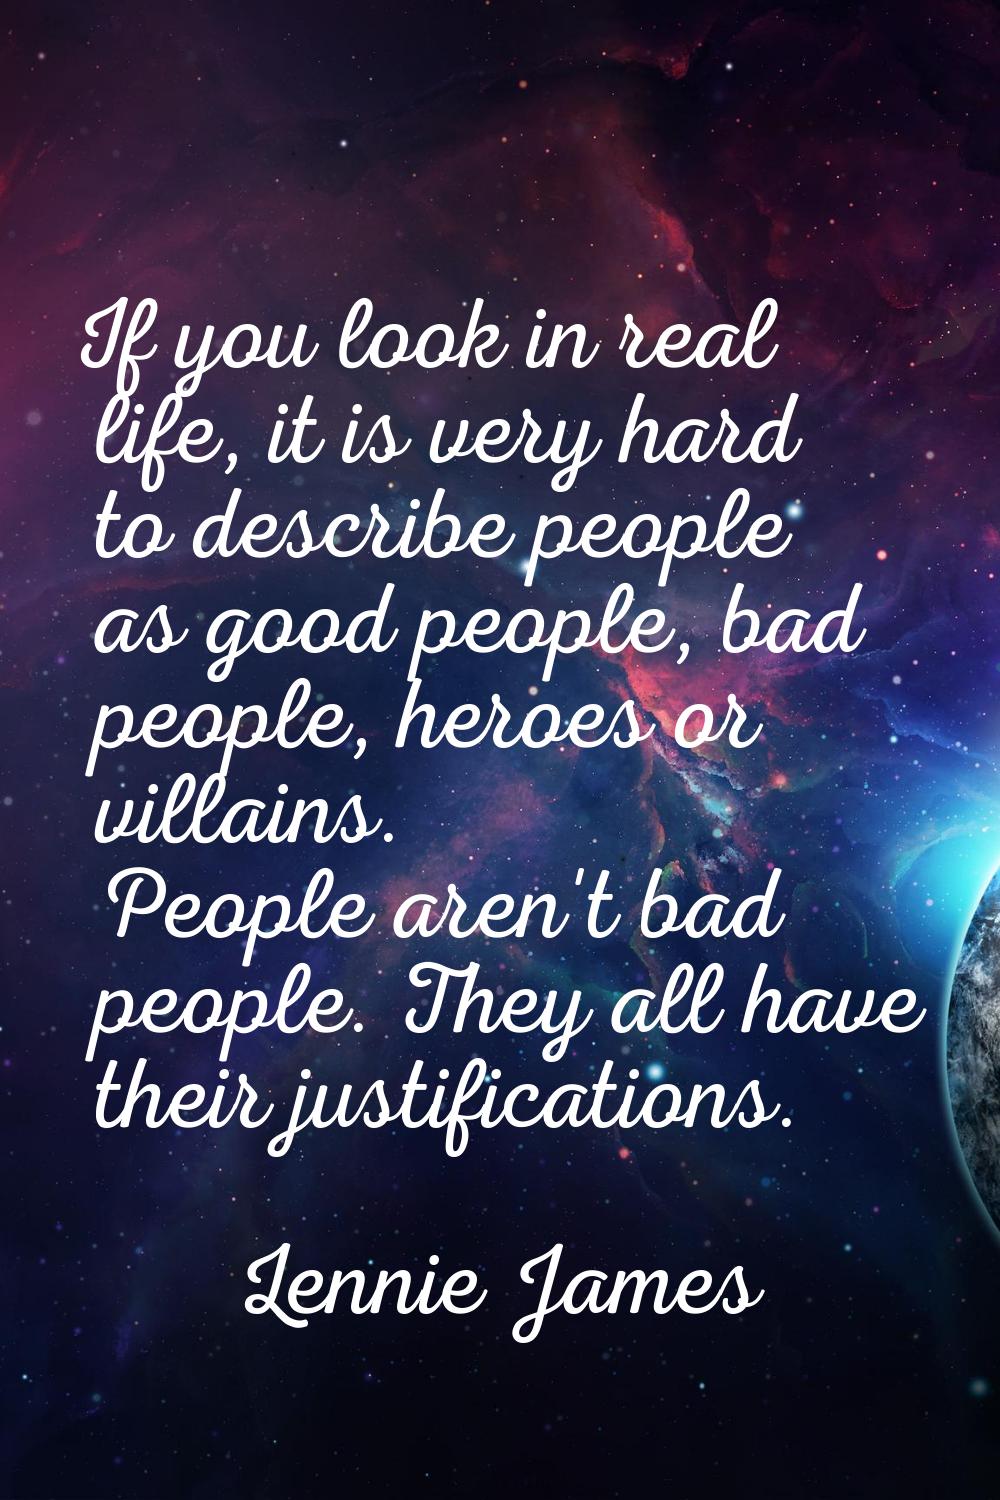 If you look in real life, it is very hard to describe people as good people, bad people, heroes or 